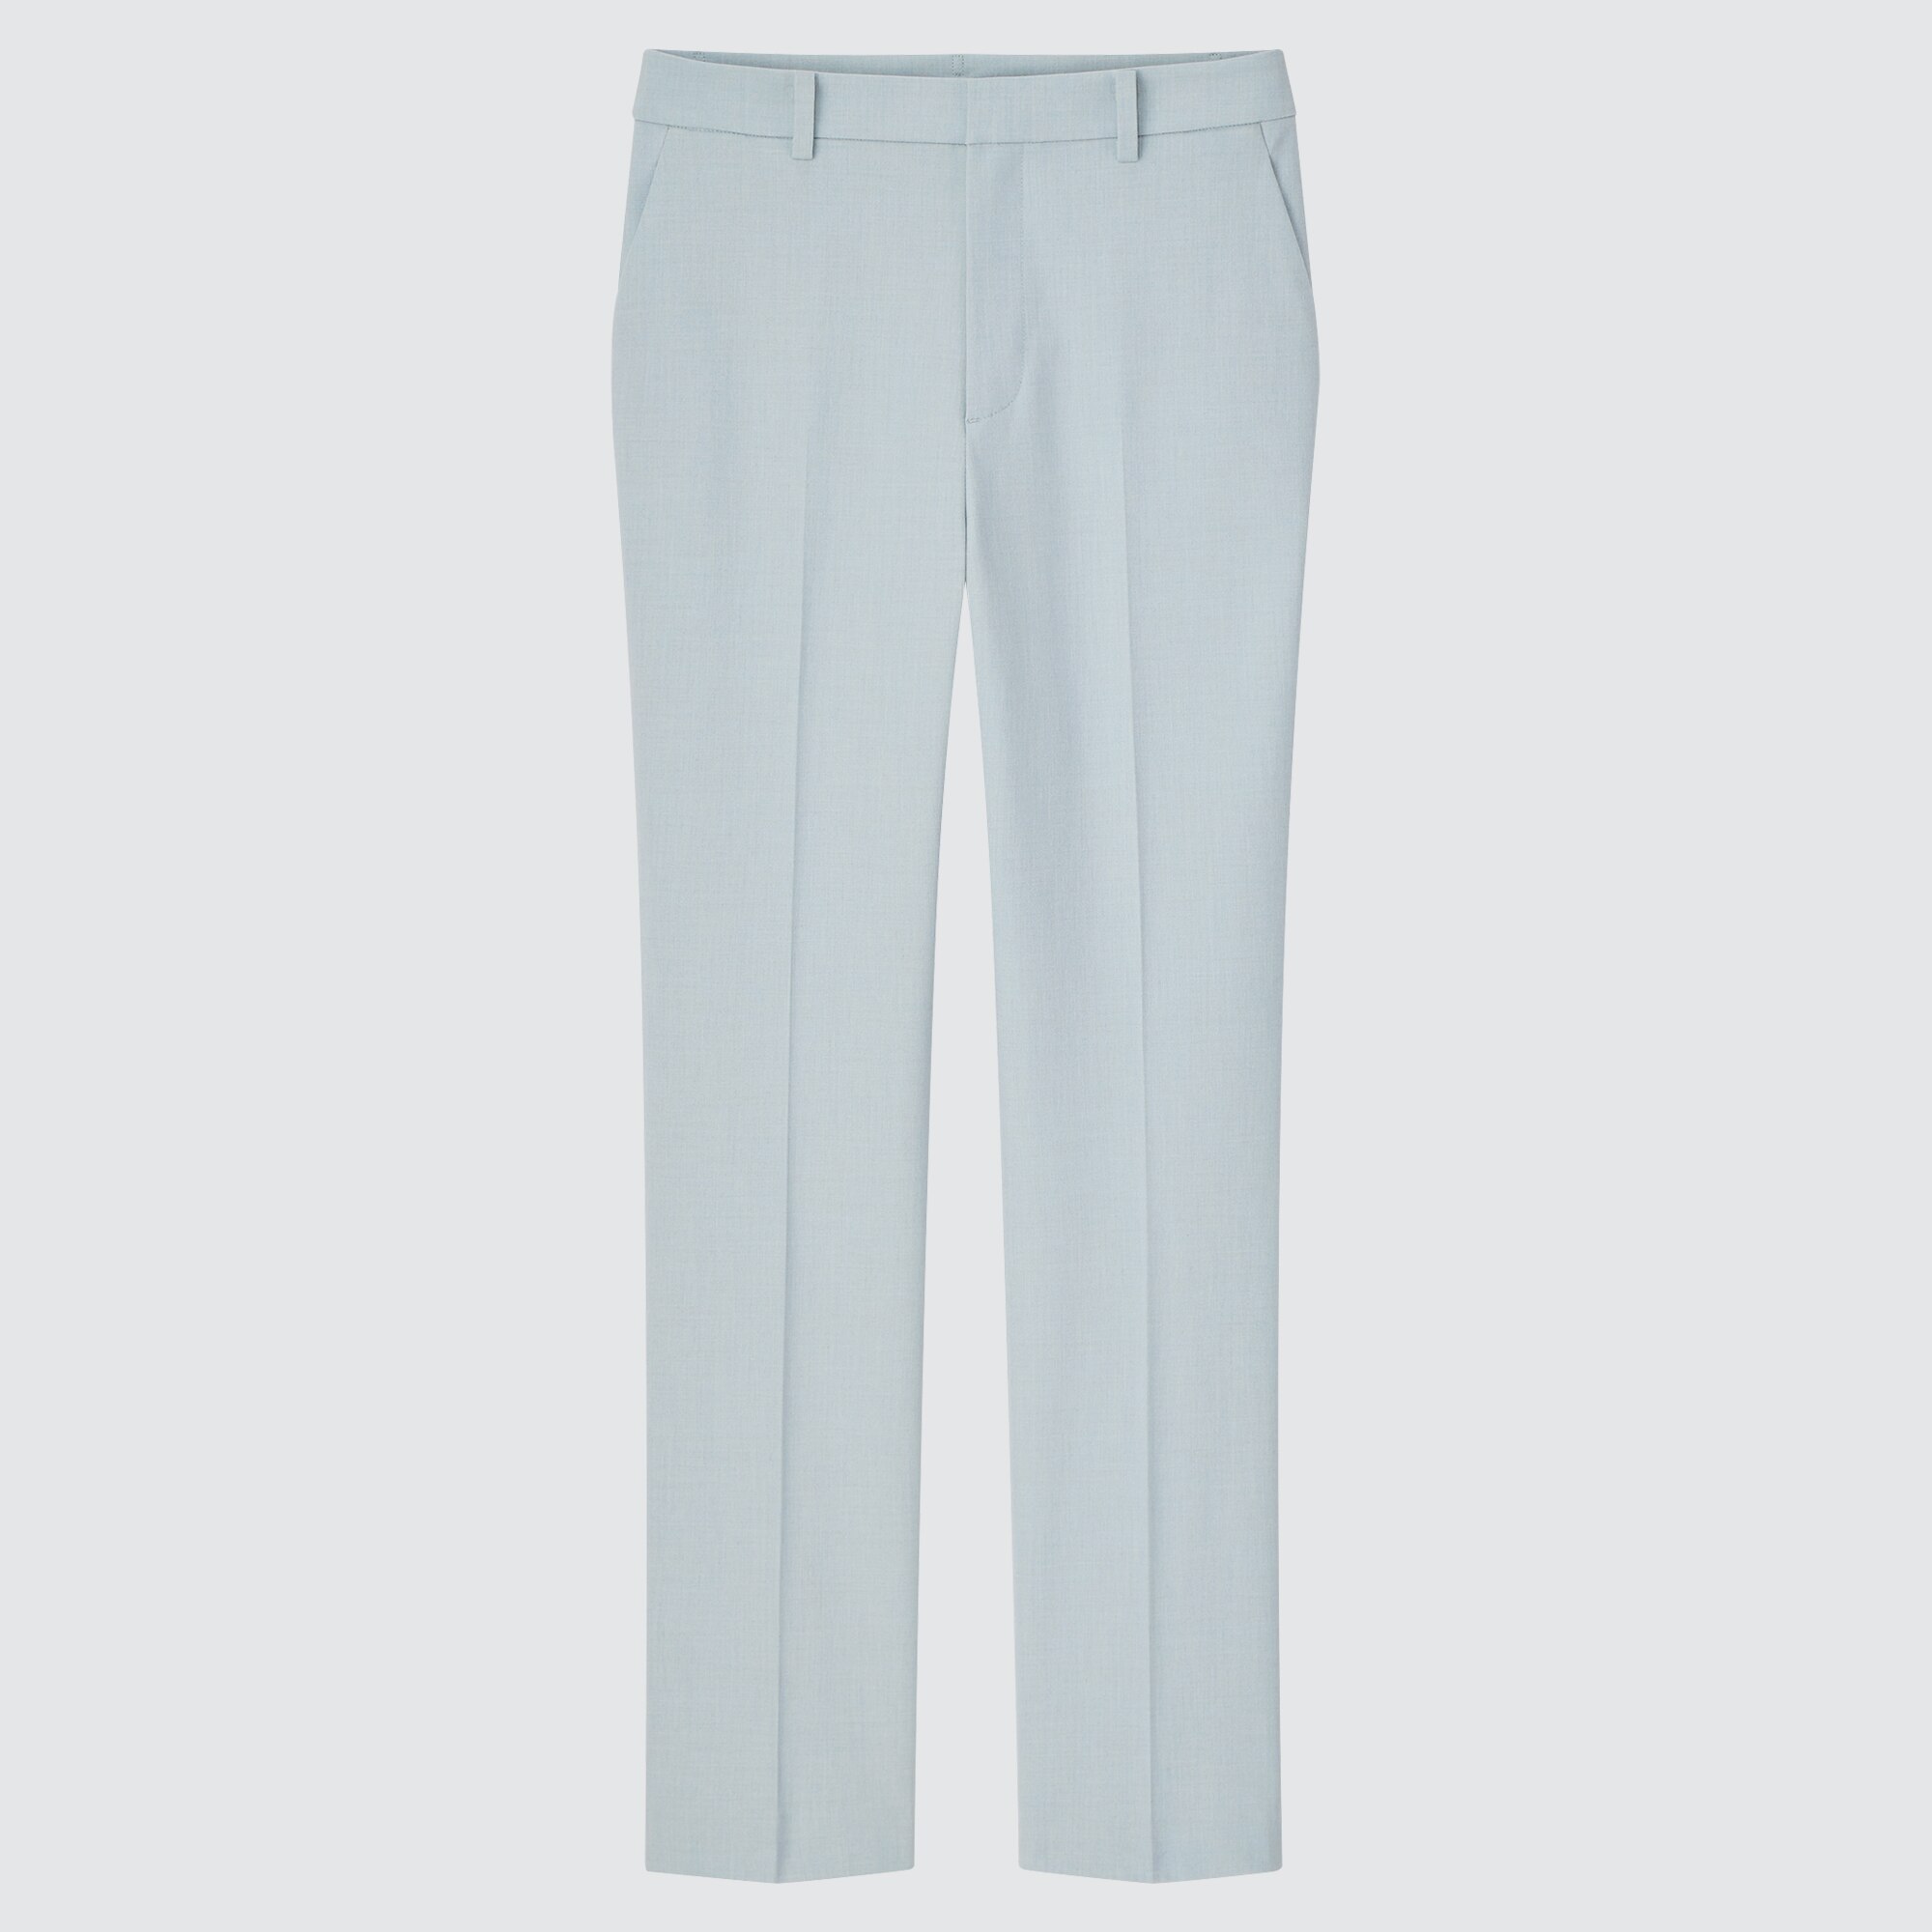 Uniqlo Women WideFit Curved Twill Jersey Pants Review 2020  The Strategist